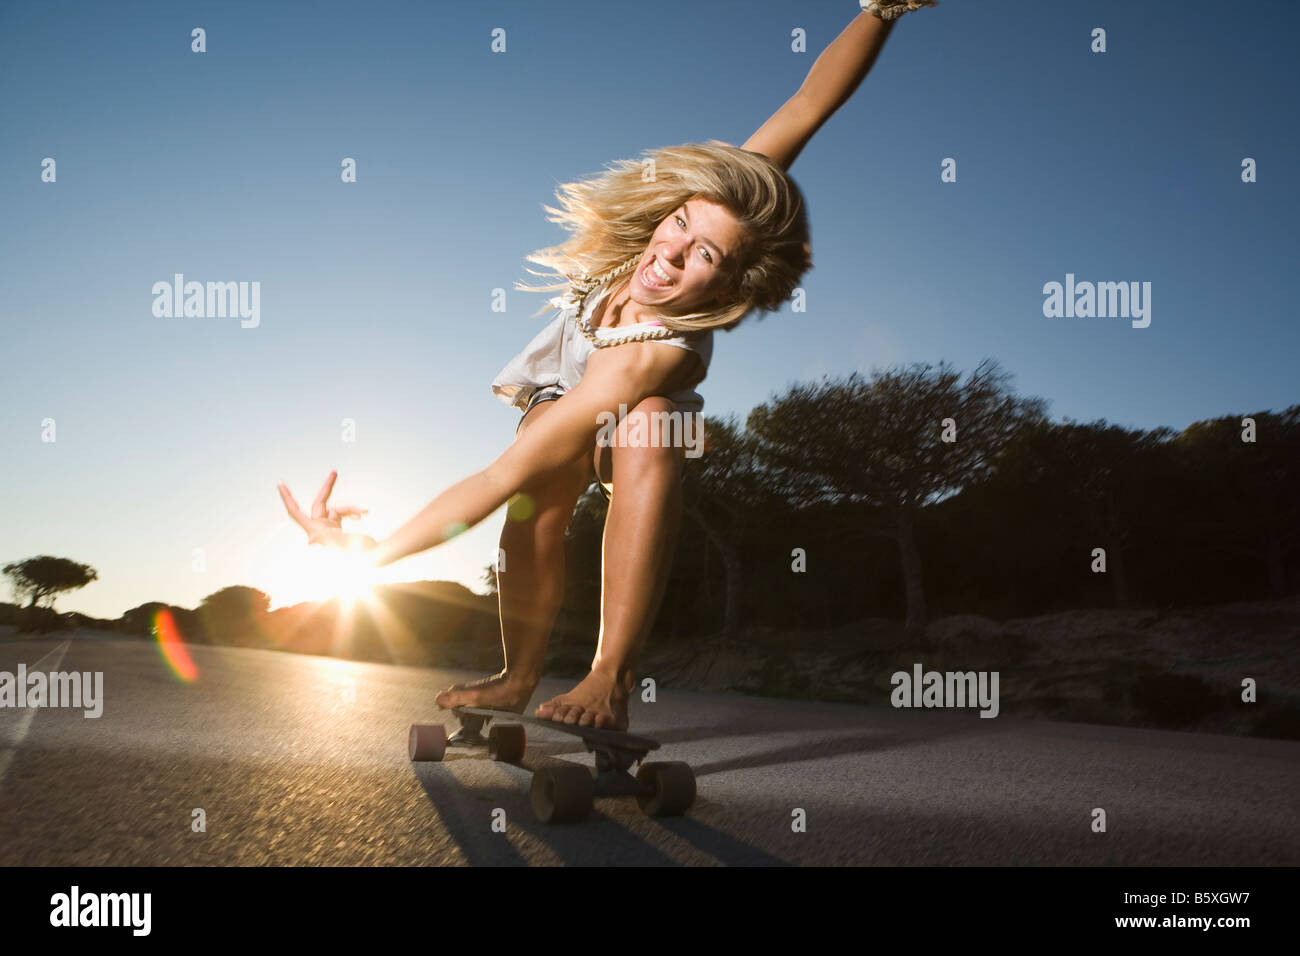 Woman on skateboard with crazy facial expression Stock Photo